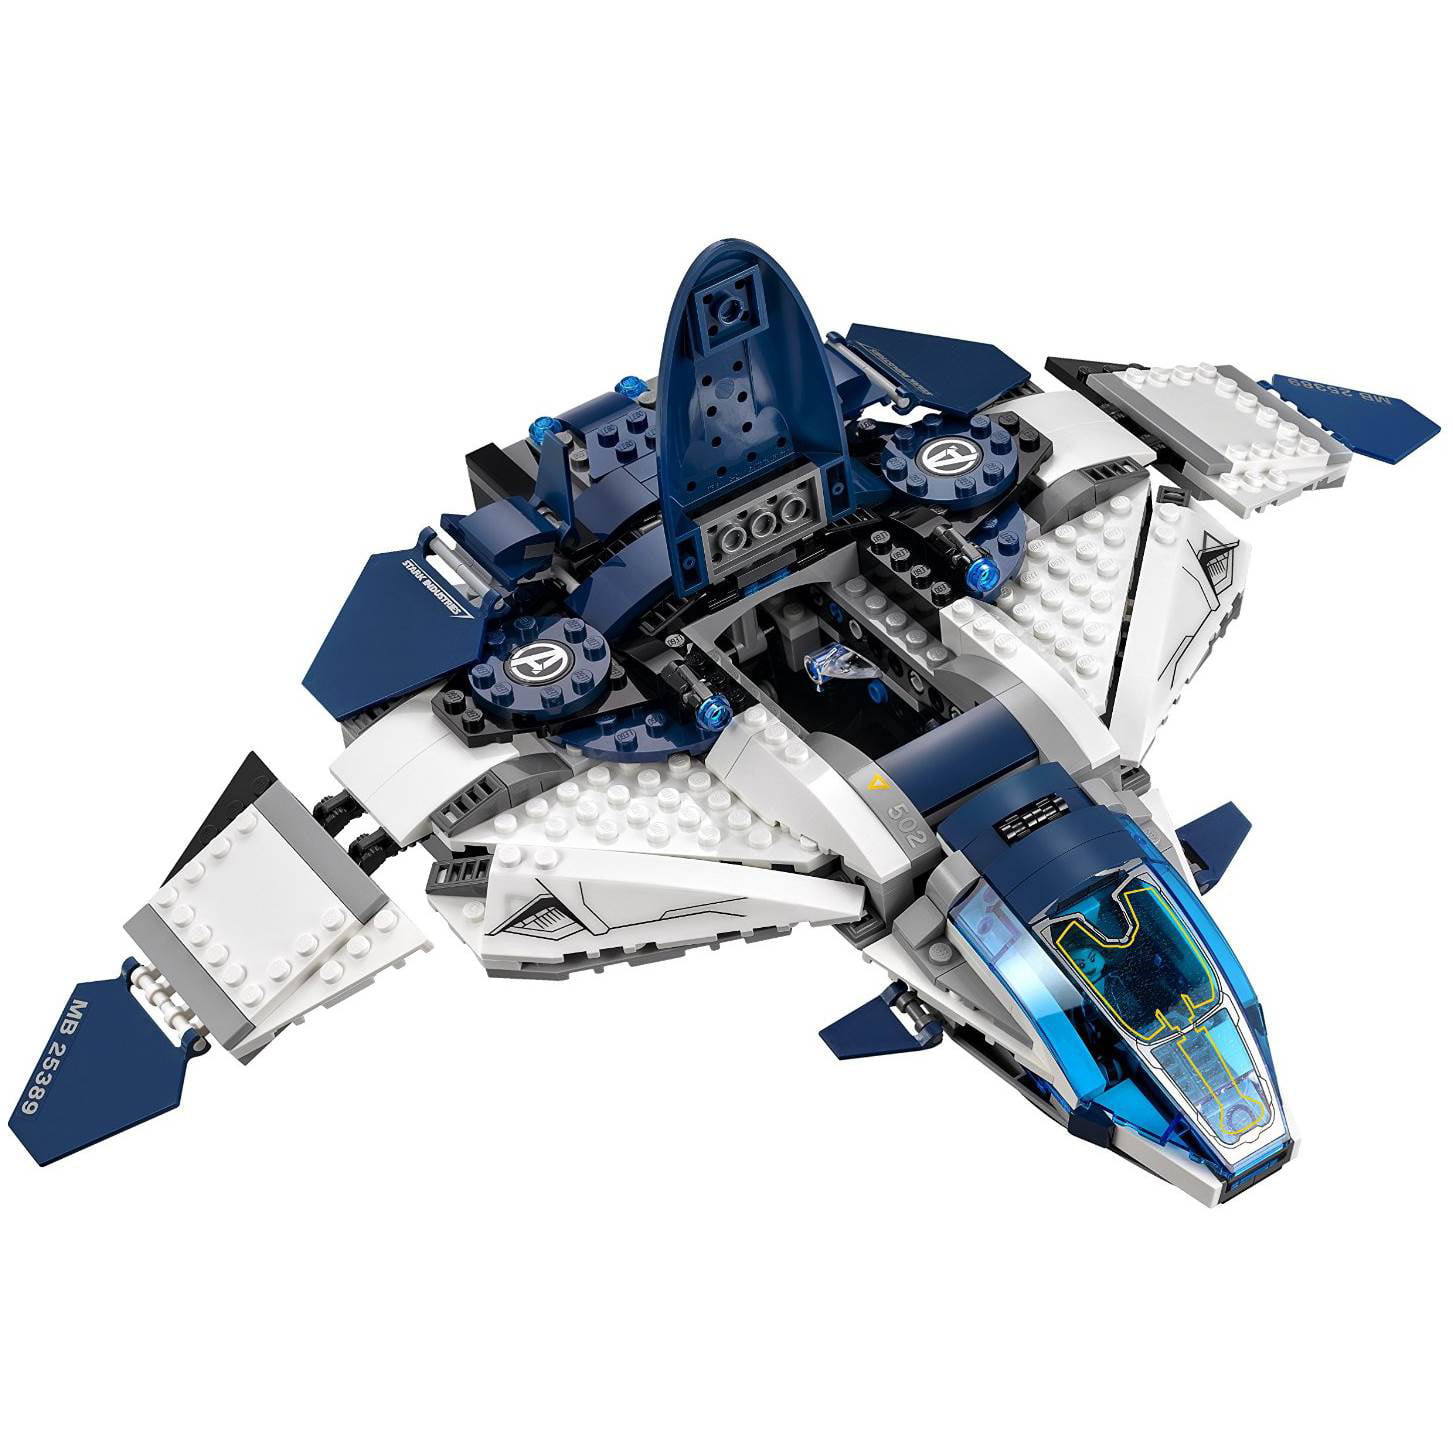 LEGO Marvel Super Heroes The Avengers Quinjet City Chase for sale online 76032